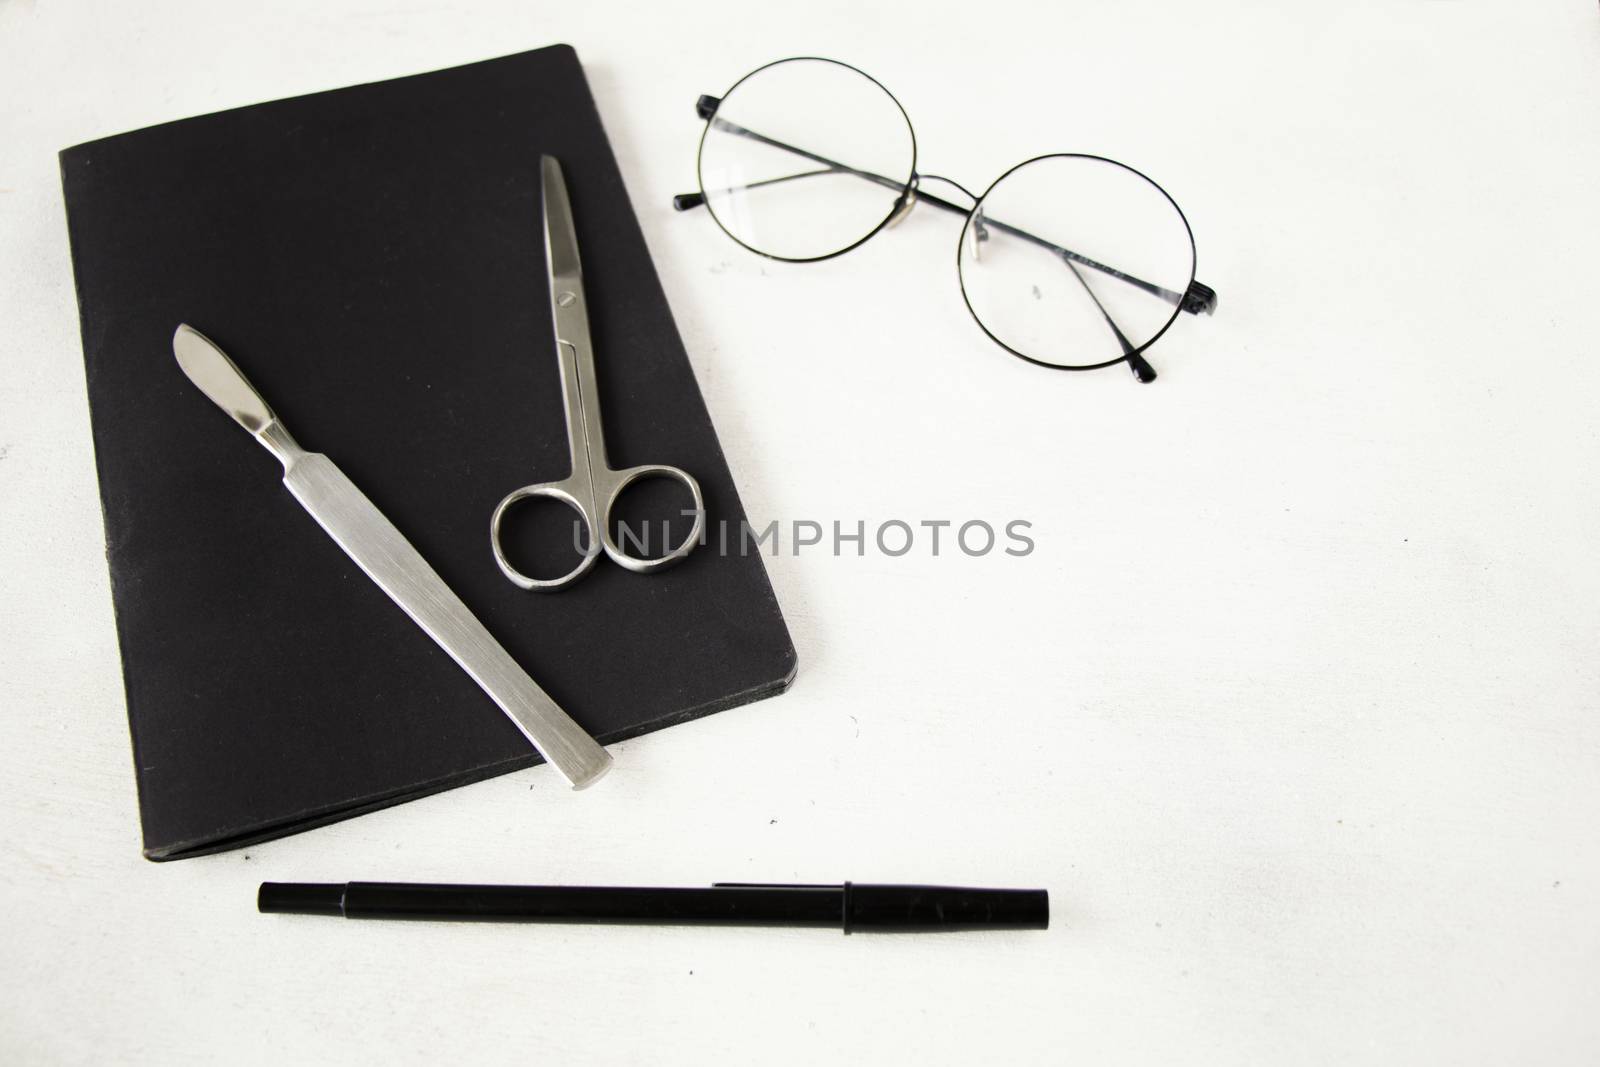 Medical, anatomy, veterinary, biology students stainless steel and notebook with glass and pencil on the white background. Studio shoot.